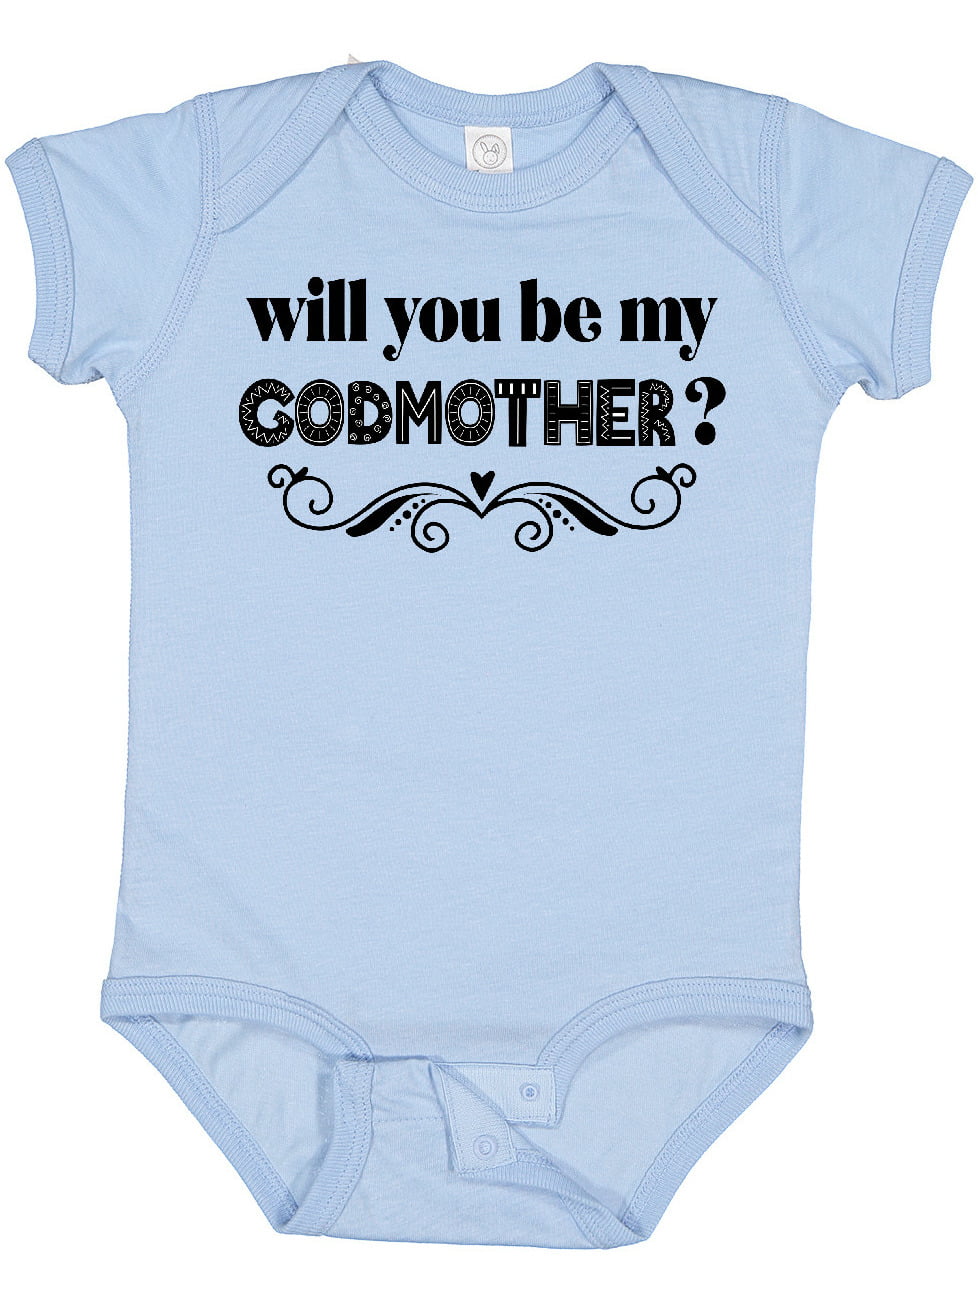 My Godfather Is An Engineer What Super Power Does Yours Have? Baby Vests Gift 